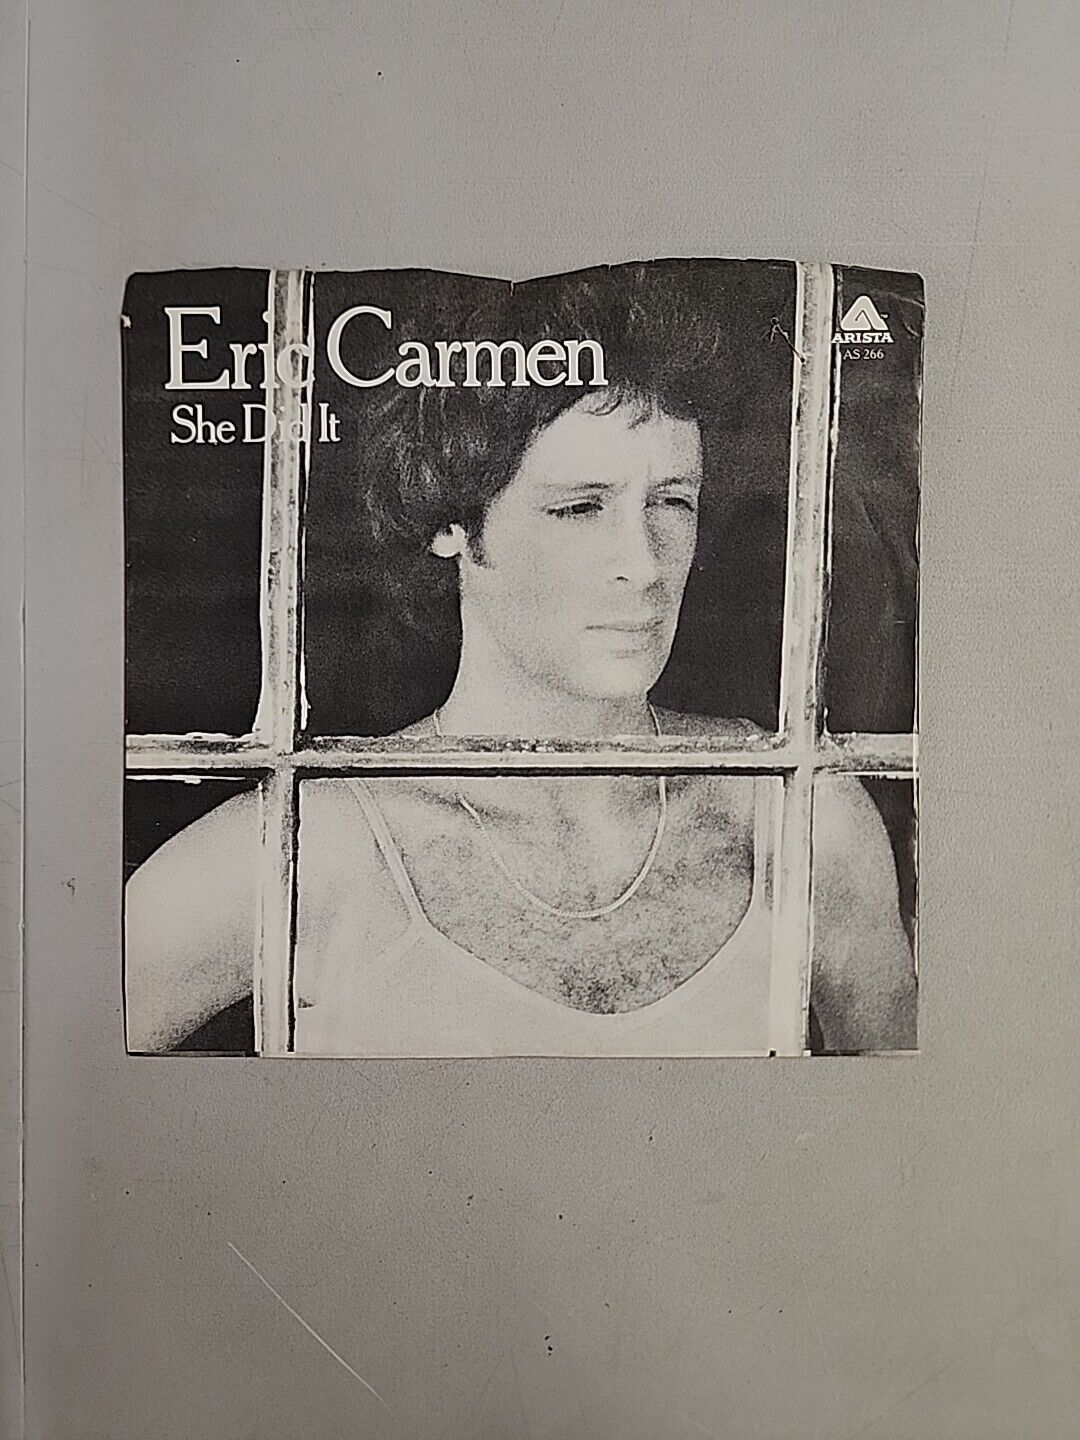 Eric Carmen - She Did It - RECORD SLEEVE ONLY (45RPM 7”) (SLV168) 